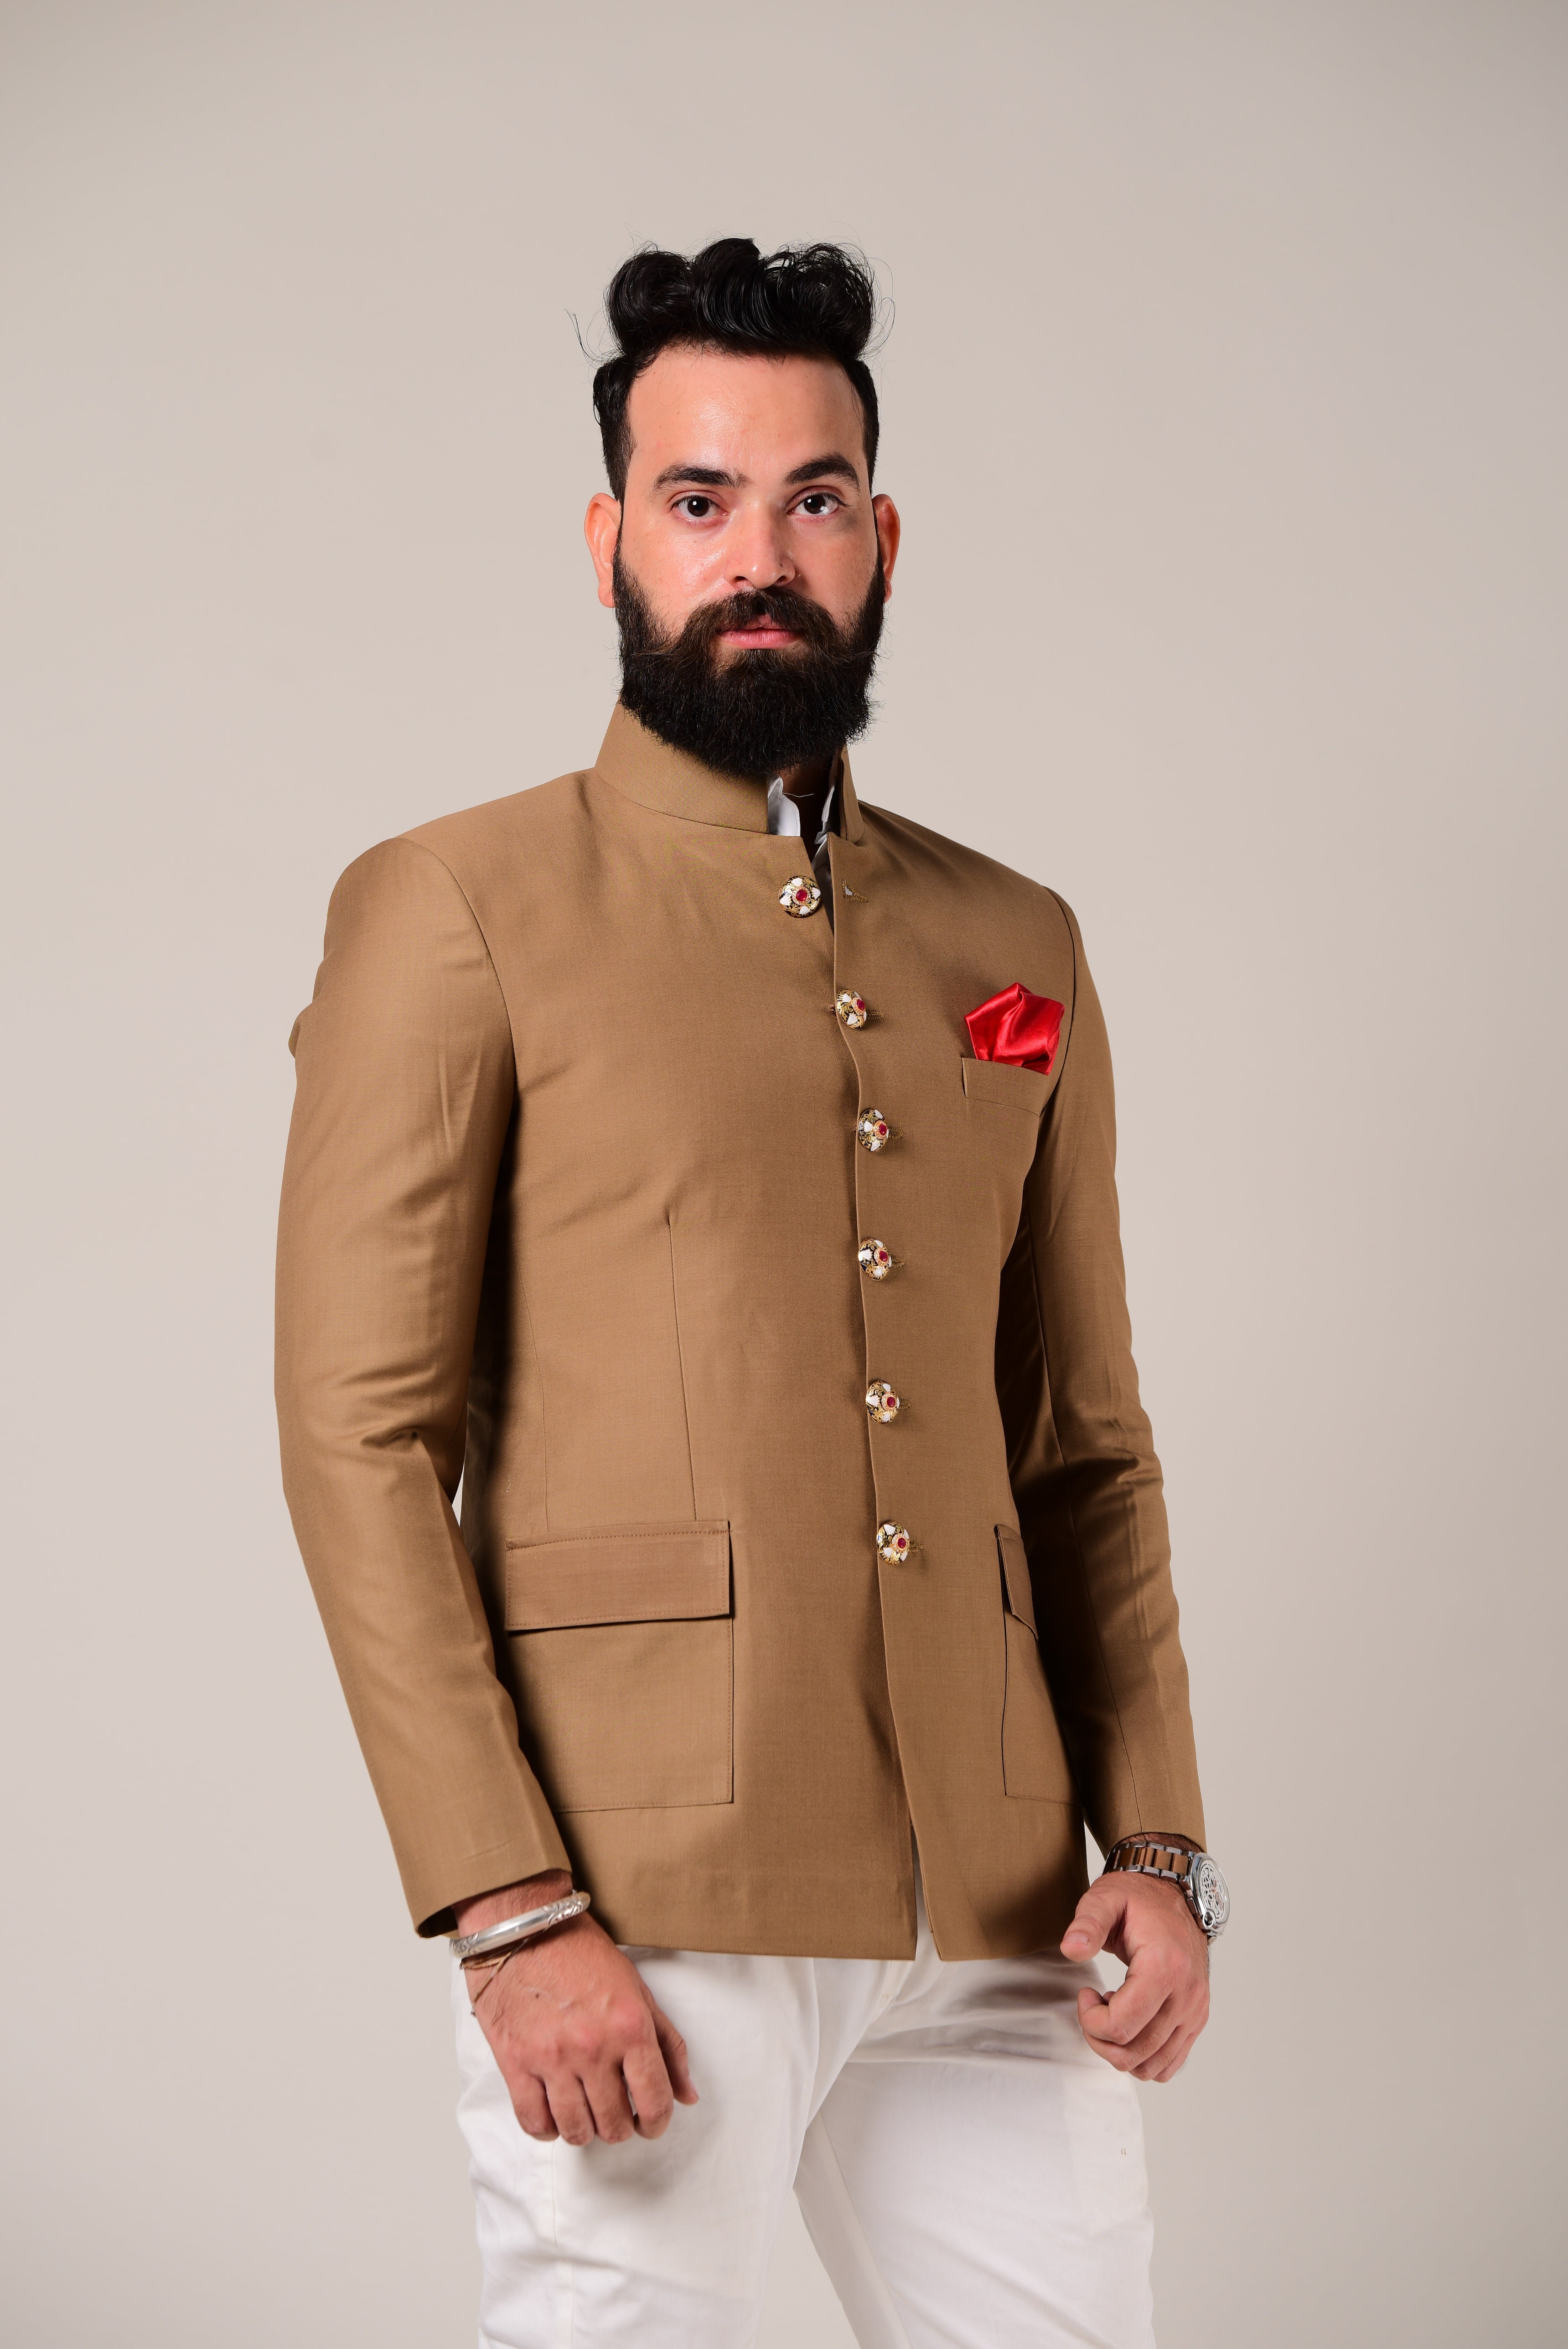 Alluring Camel Brown Jodhpuri Bandhgala with White Trouser |Terry Rayon| Perfect for Formal Party Wear for Open and Daylight Functions | Youth Inspired